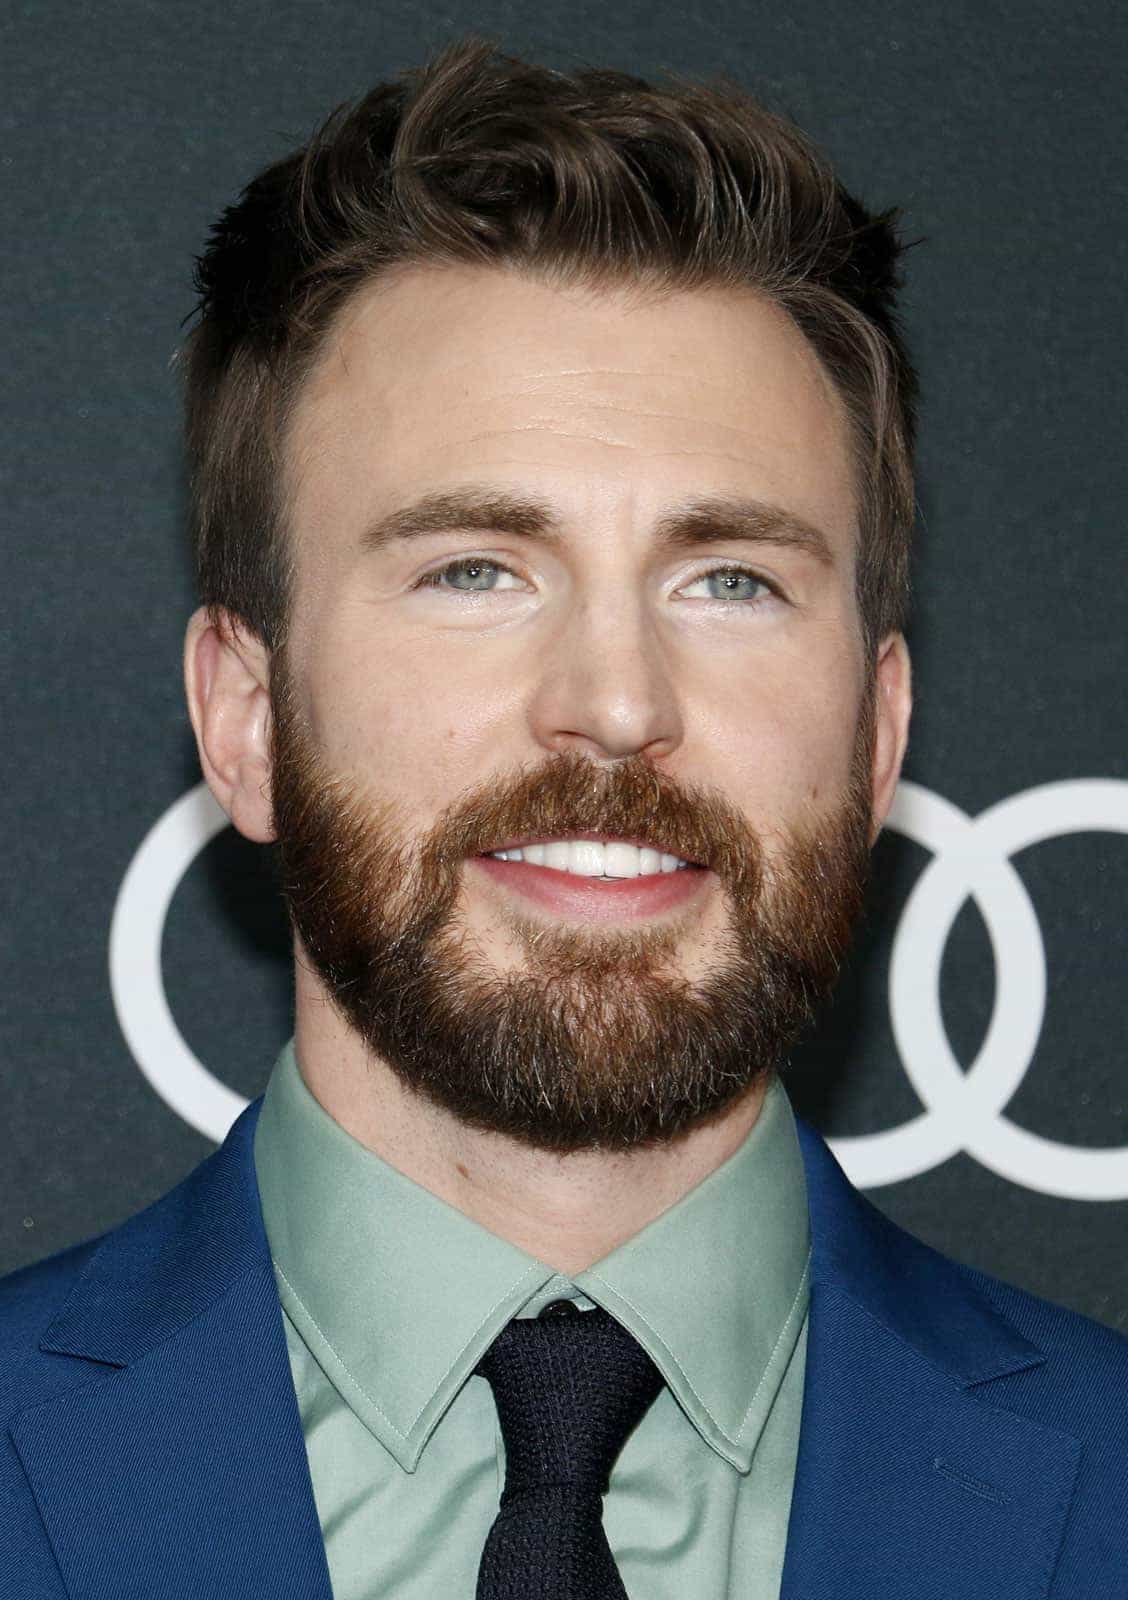 Chris Evans will voice young Buzz Lightyear